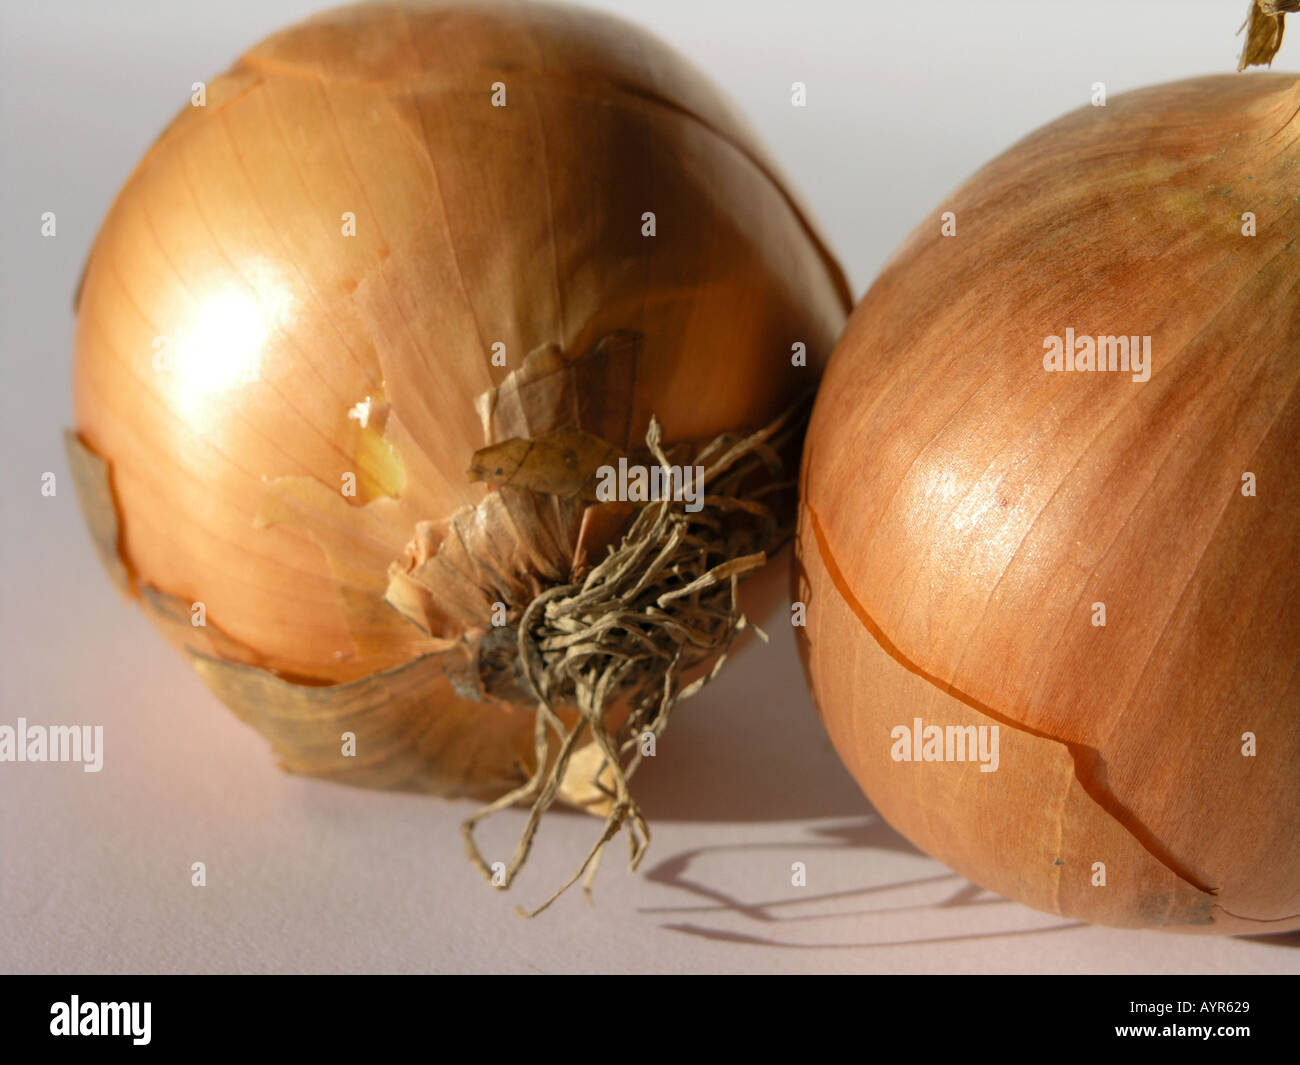 Two onions with brown skins Stock Photo